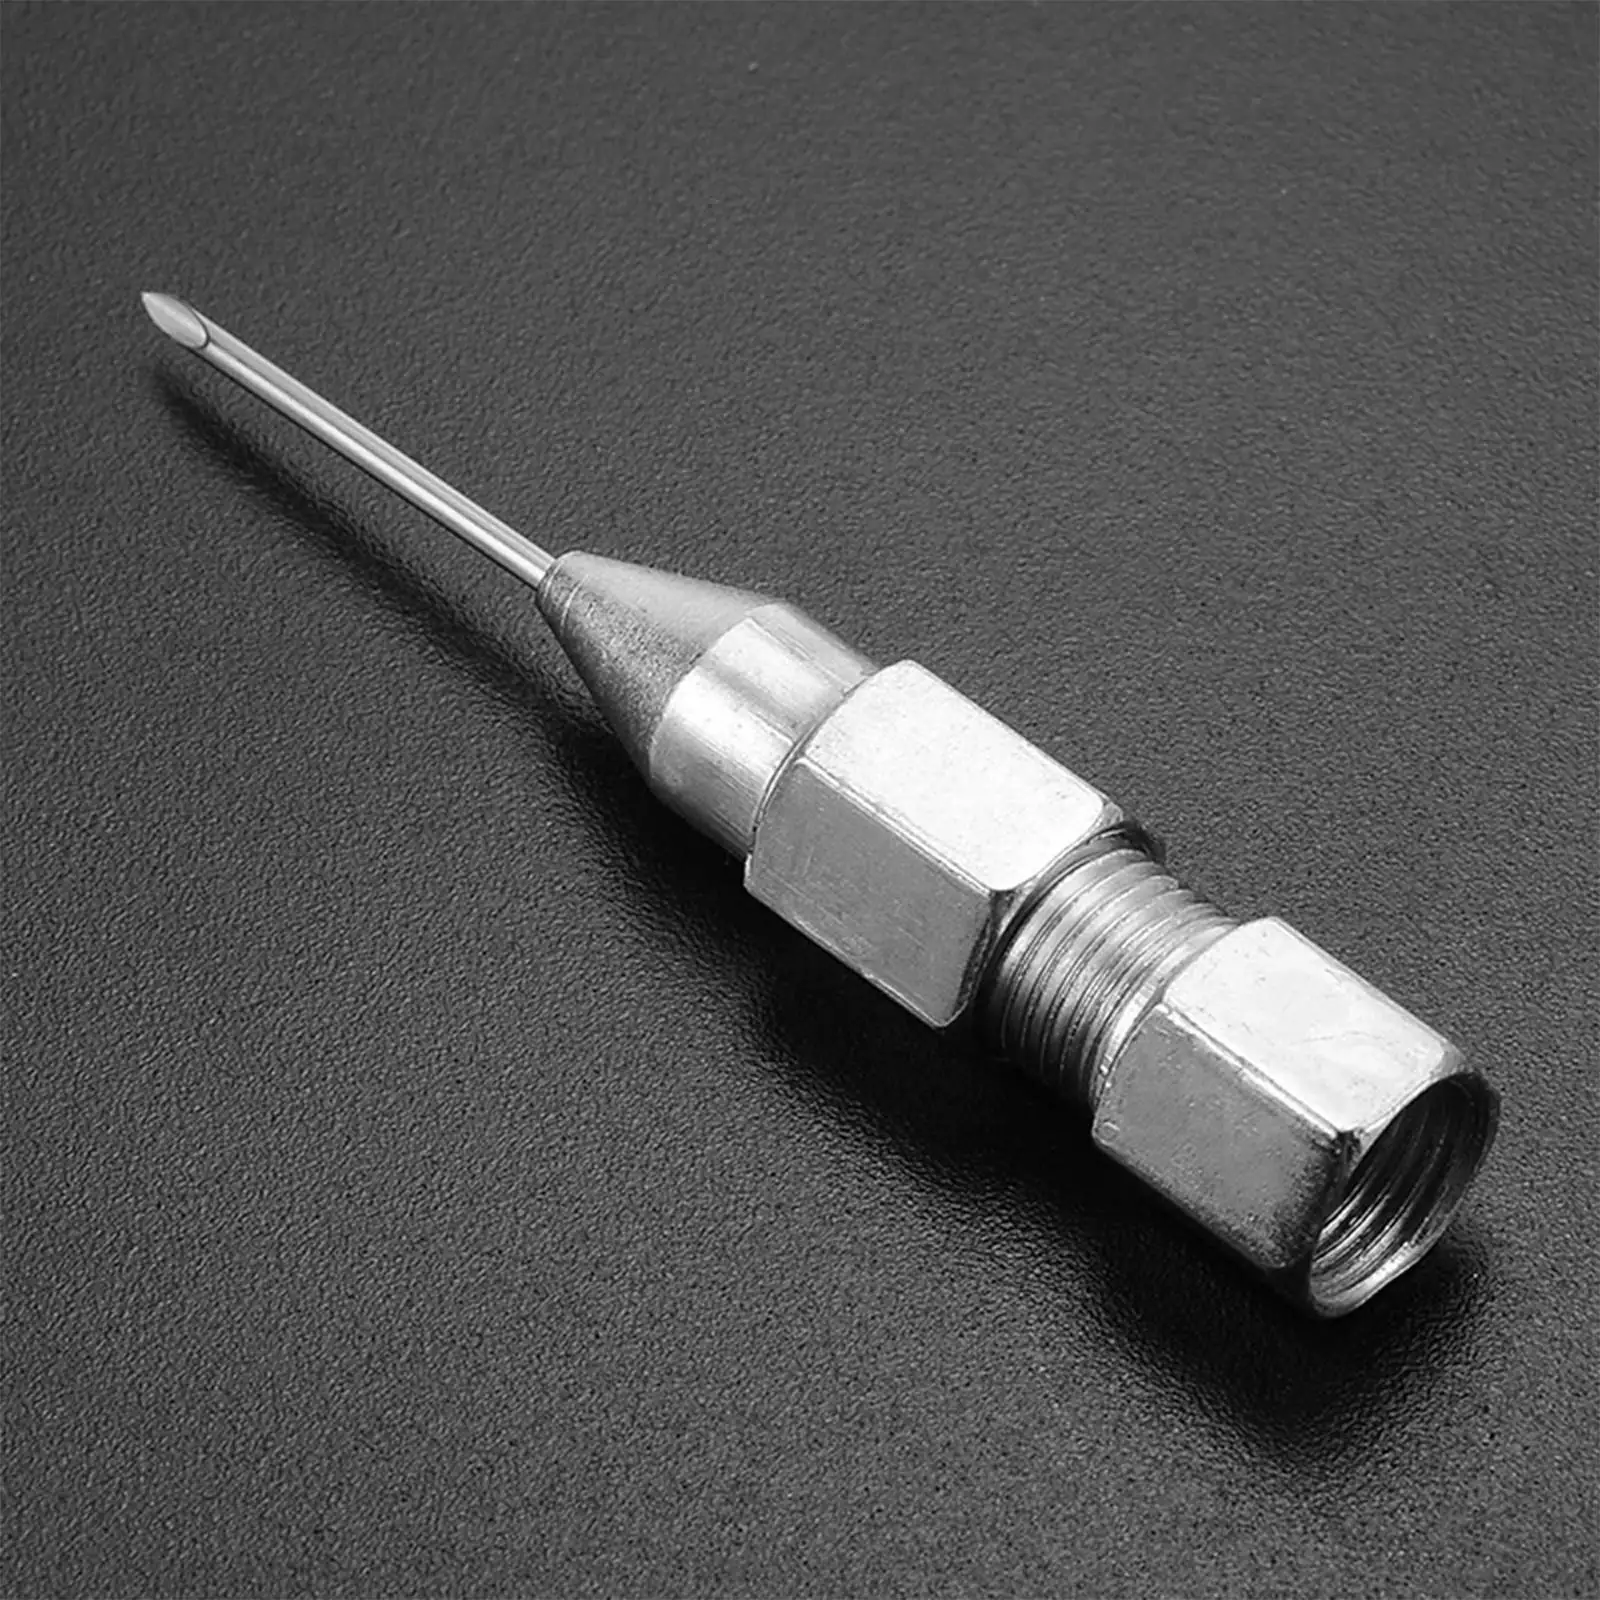 

Nozzle Dispenser Stainless Steel for Flush Tight Places Sealed Bearings Lubricating